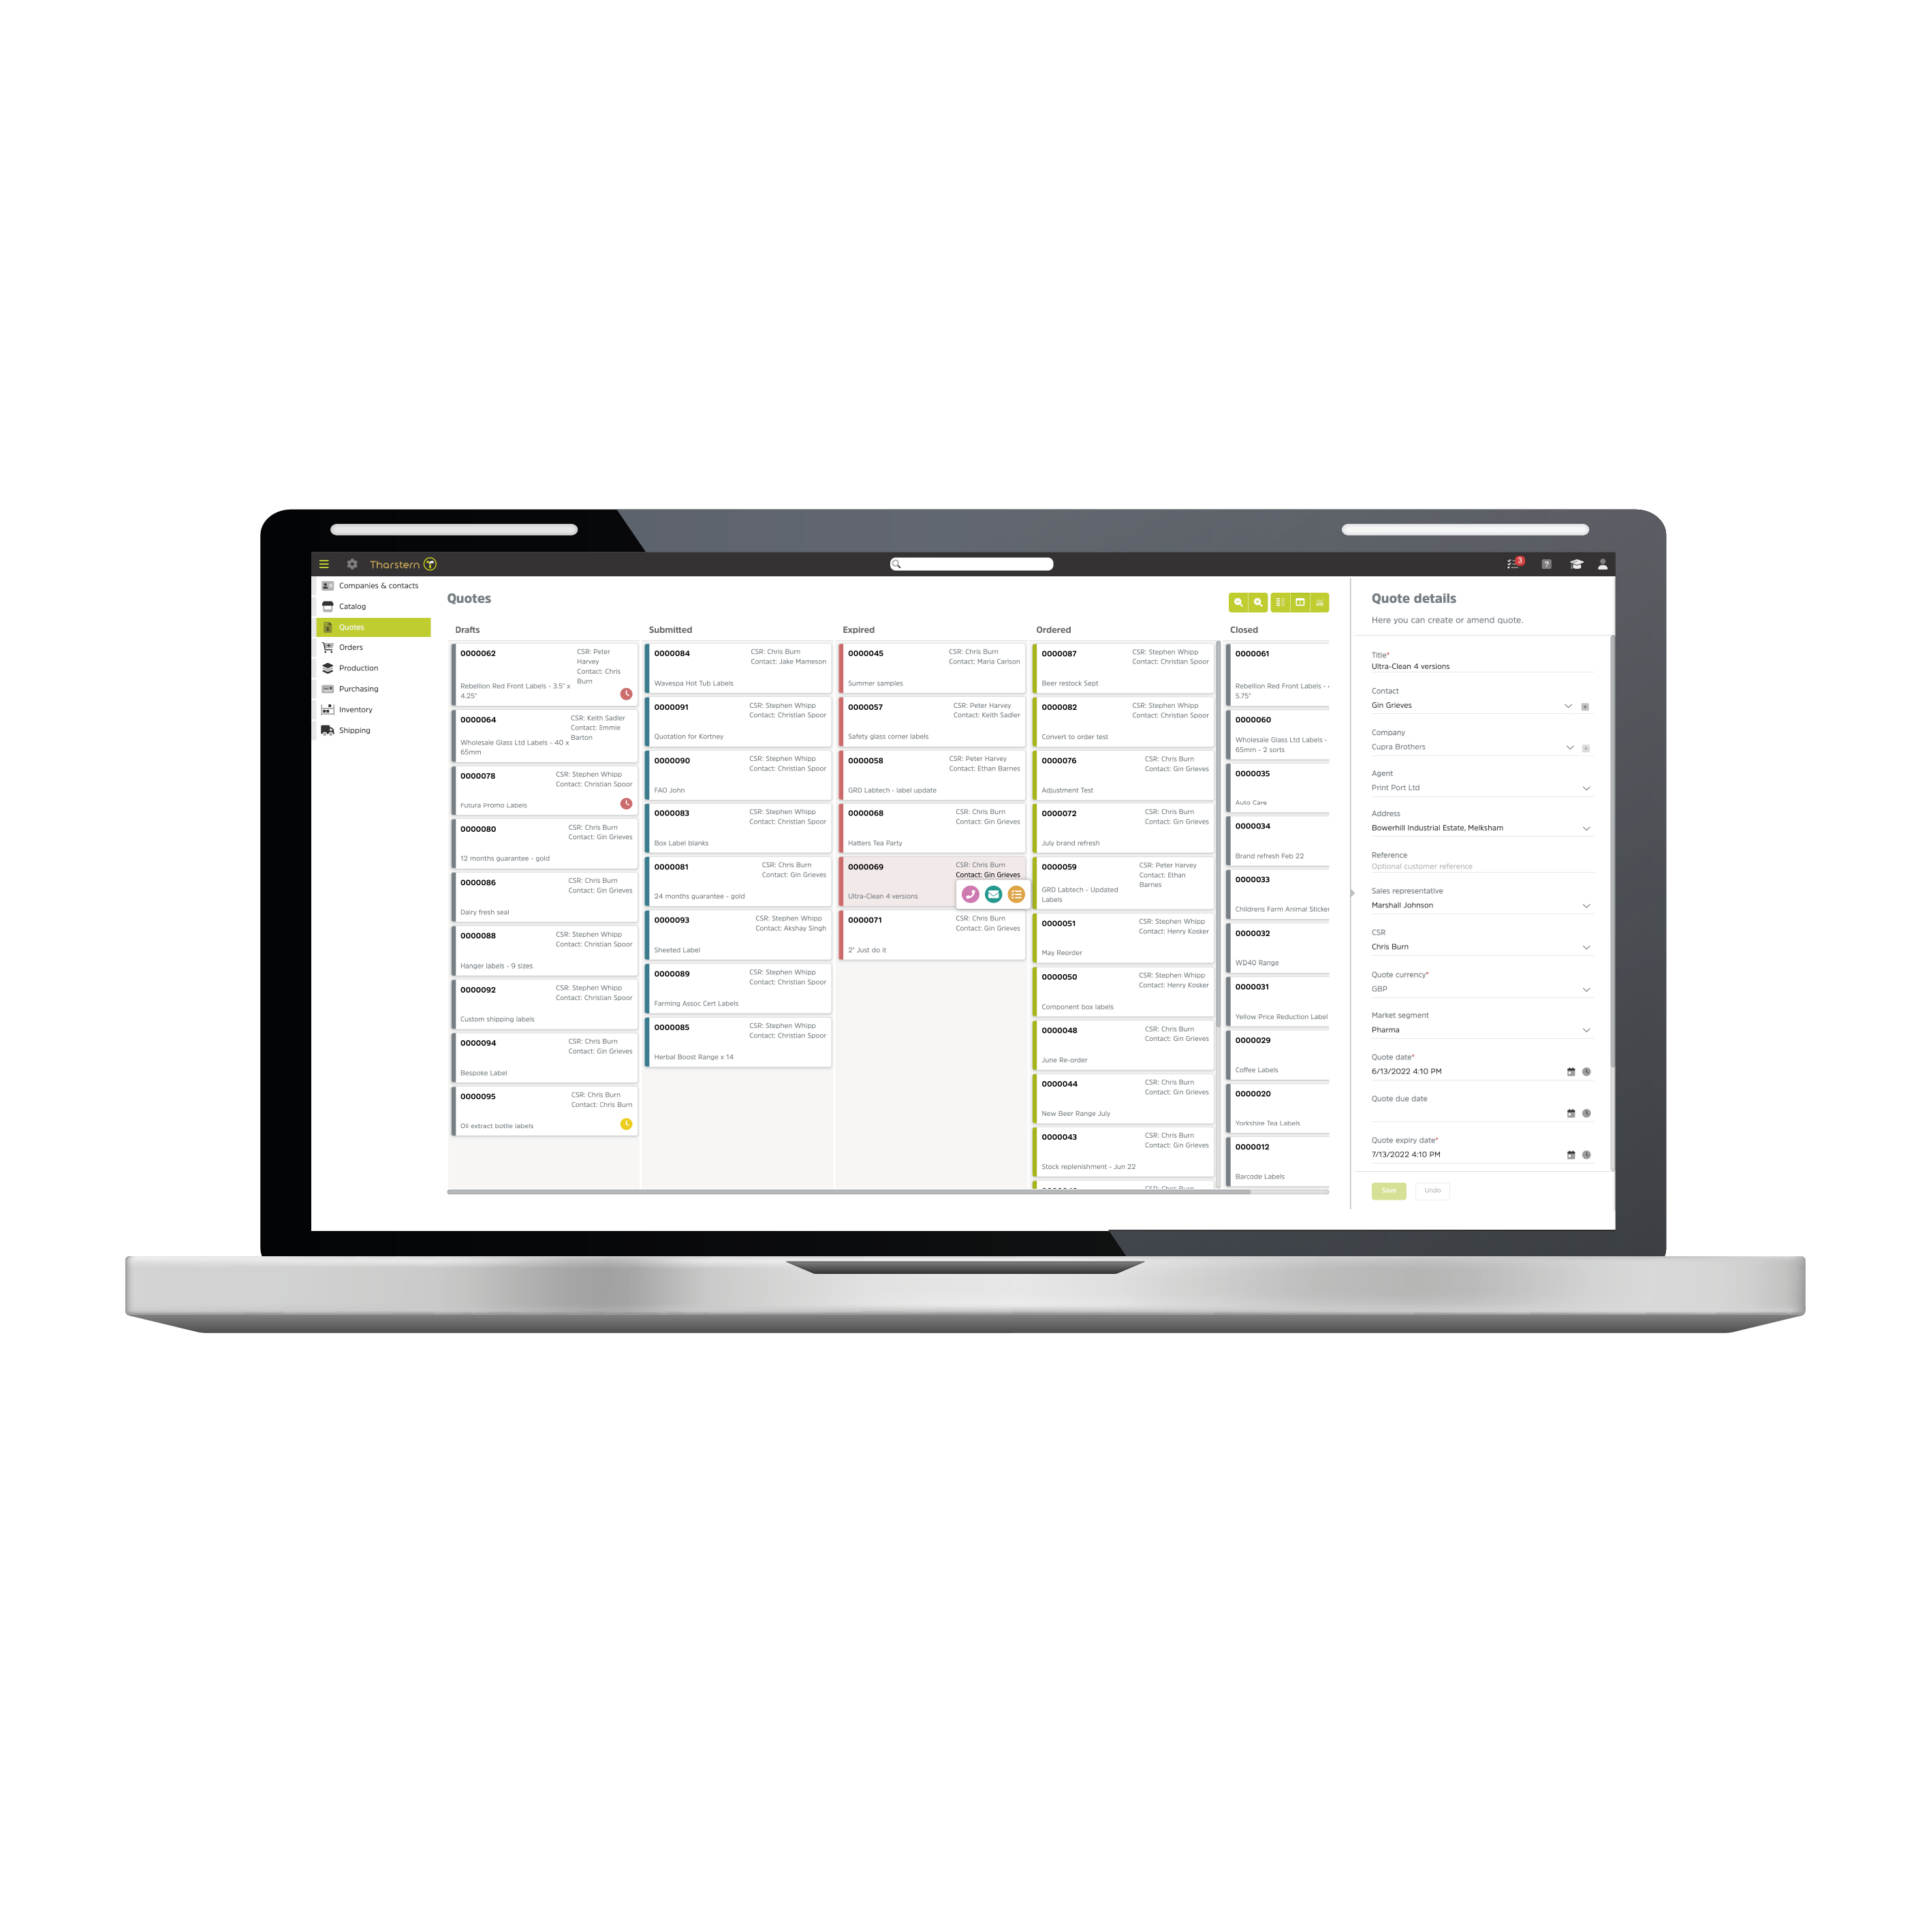 Access quotes, orders and shipments in a kanban style dashboard that allows items to flow from left to right to highlight status